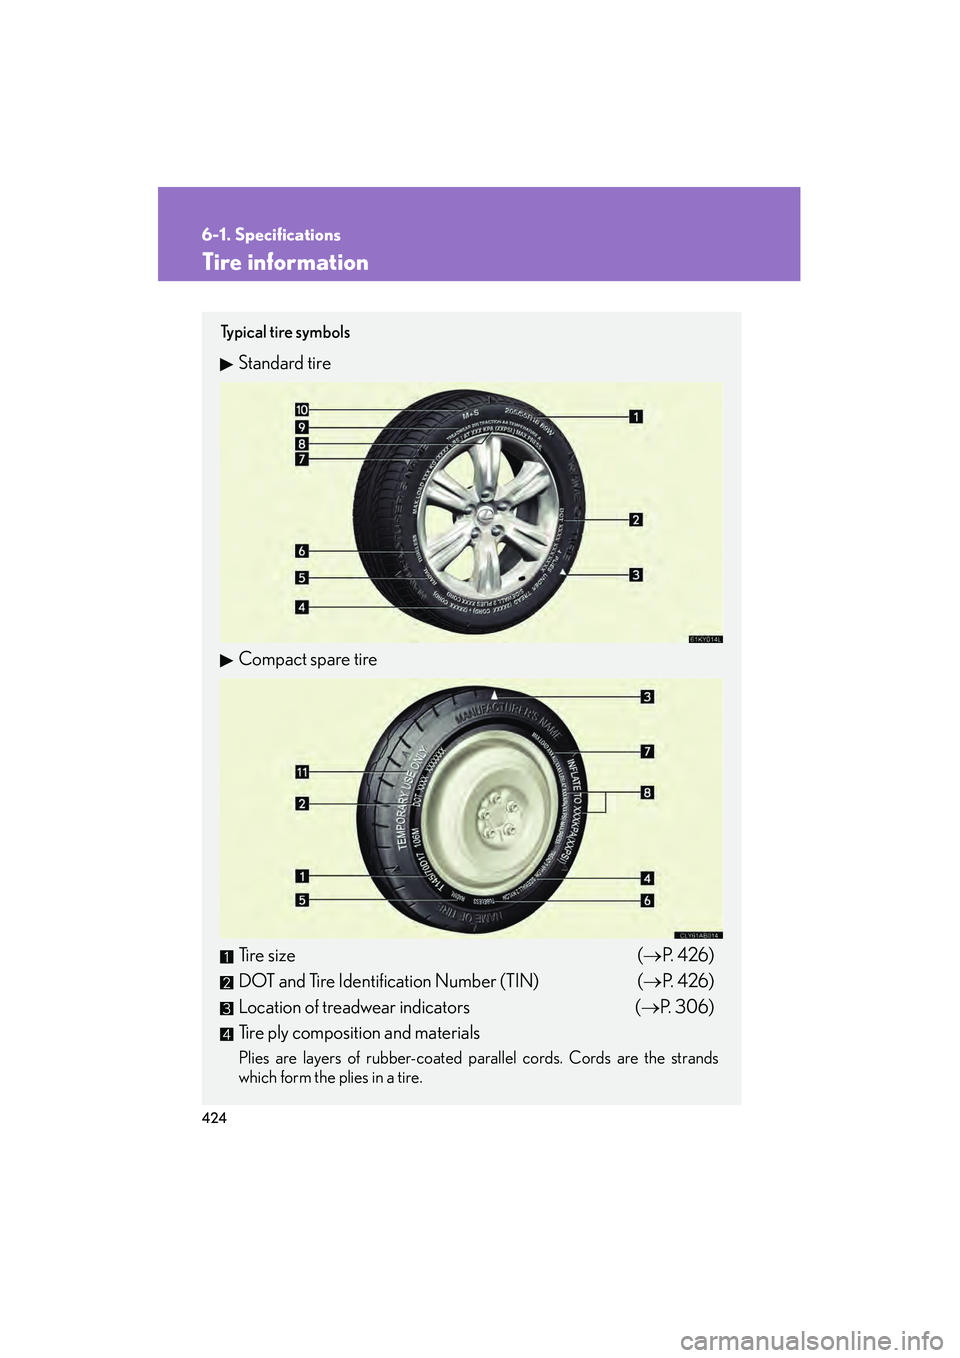 Lexus IS250 2008  Owners Manual 424
6-1. Specifications
08_IS350/250_U_(L/O_0708)
Tire information
Ty p i c a l  t i r e  s y m b o l s
Standard tire
Compact spare tire
Tire size (→P.  4 2 6 )
DOT and Tire Identification Number (T